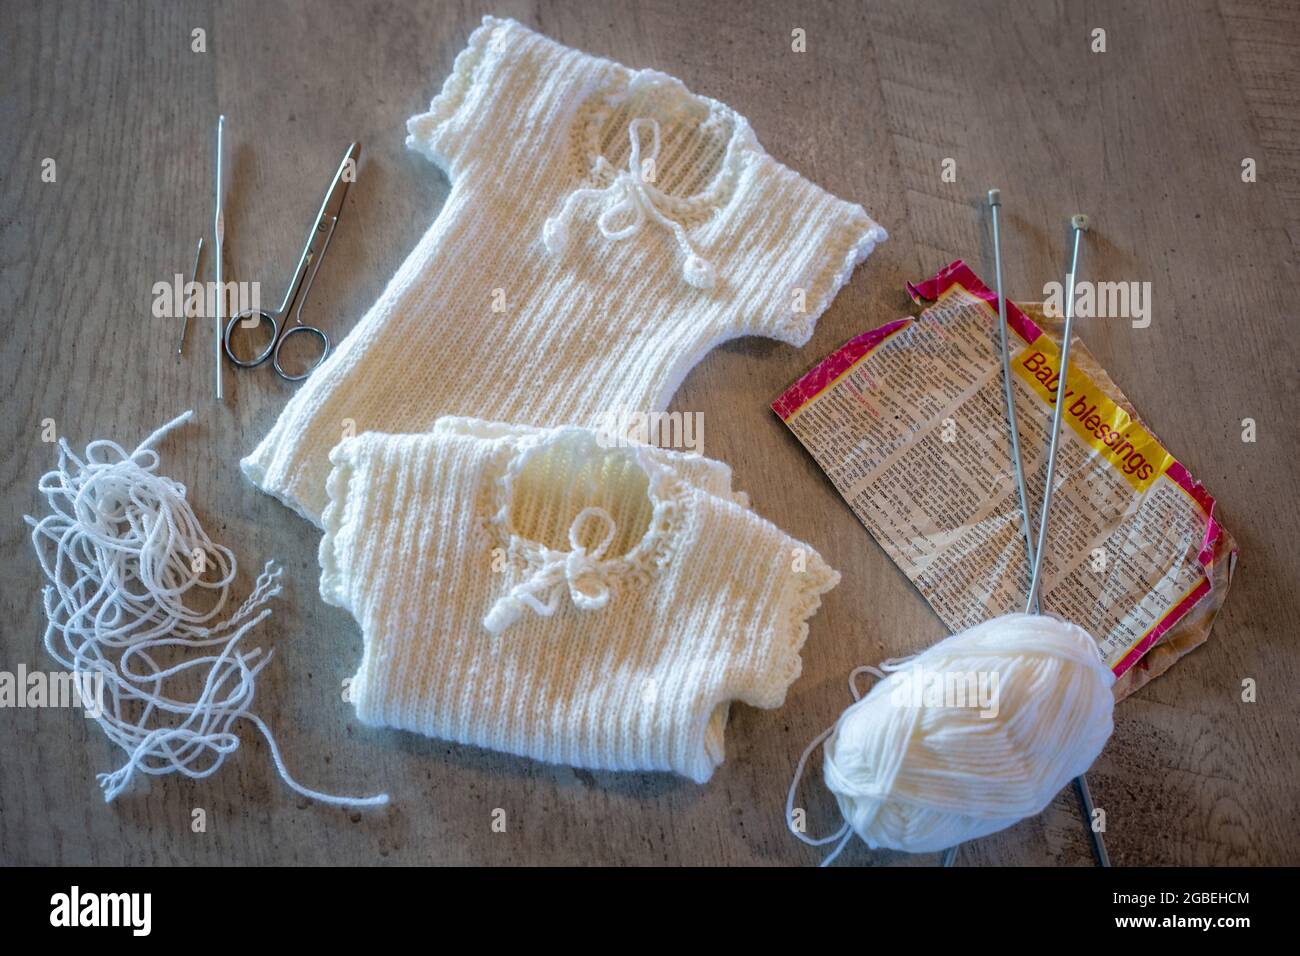 Woollen baby merino singlets are hand knitted with crochet edging in preparation for a new baby Stock Photo